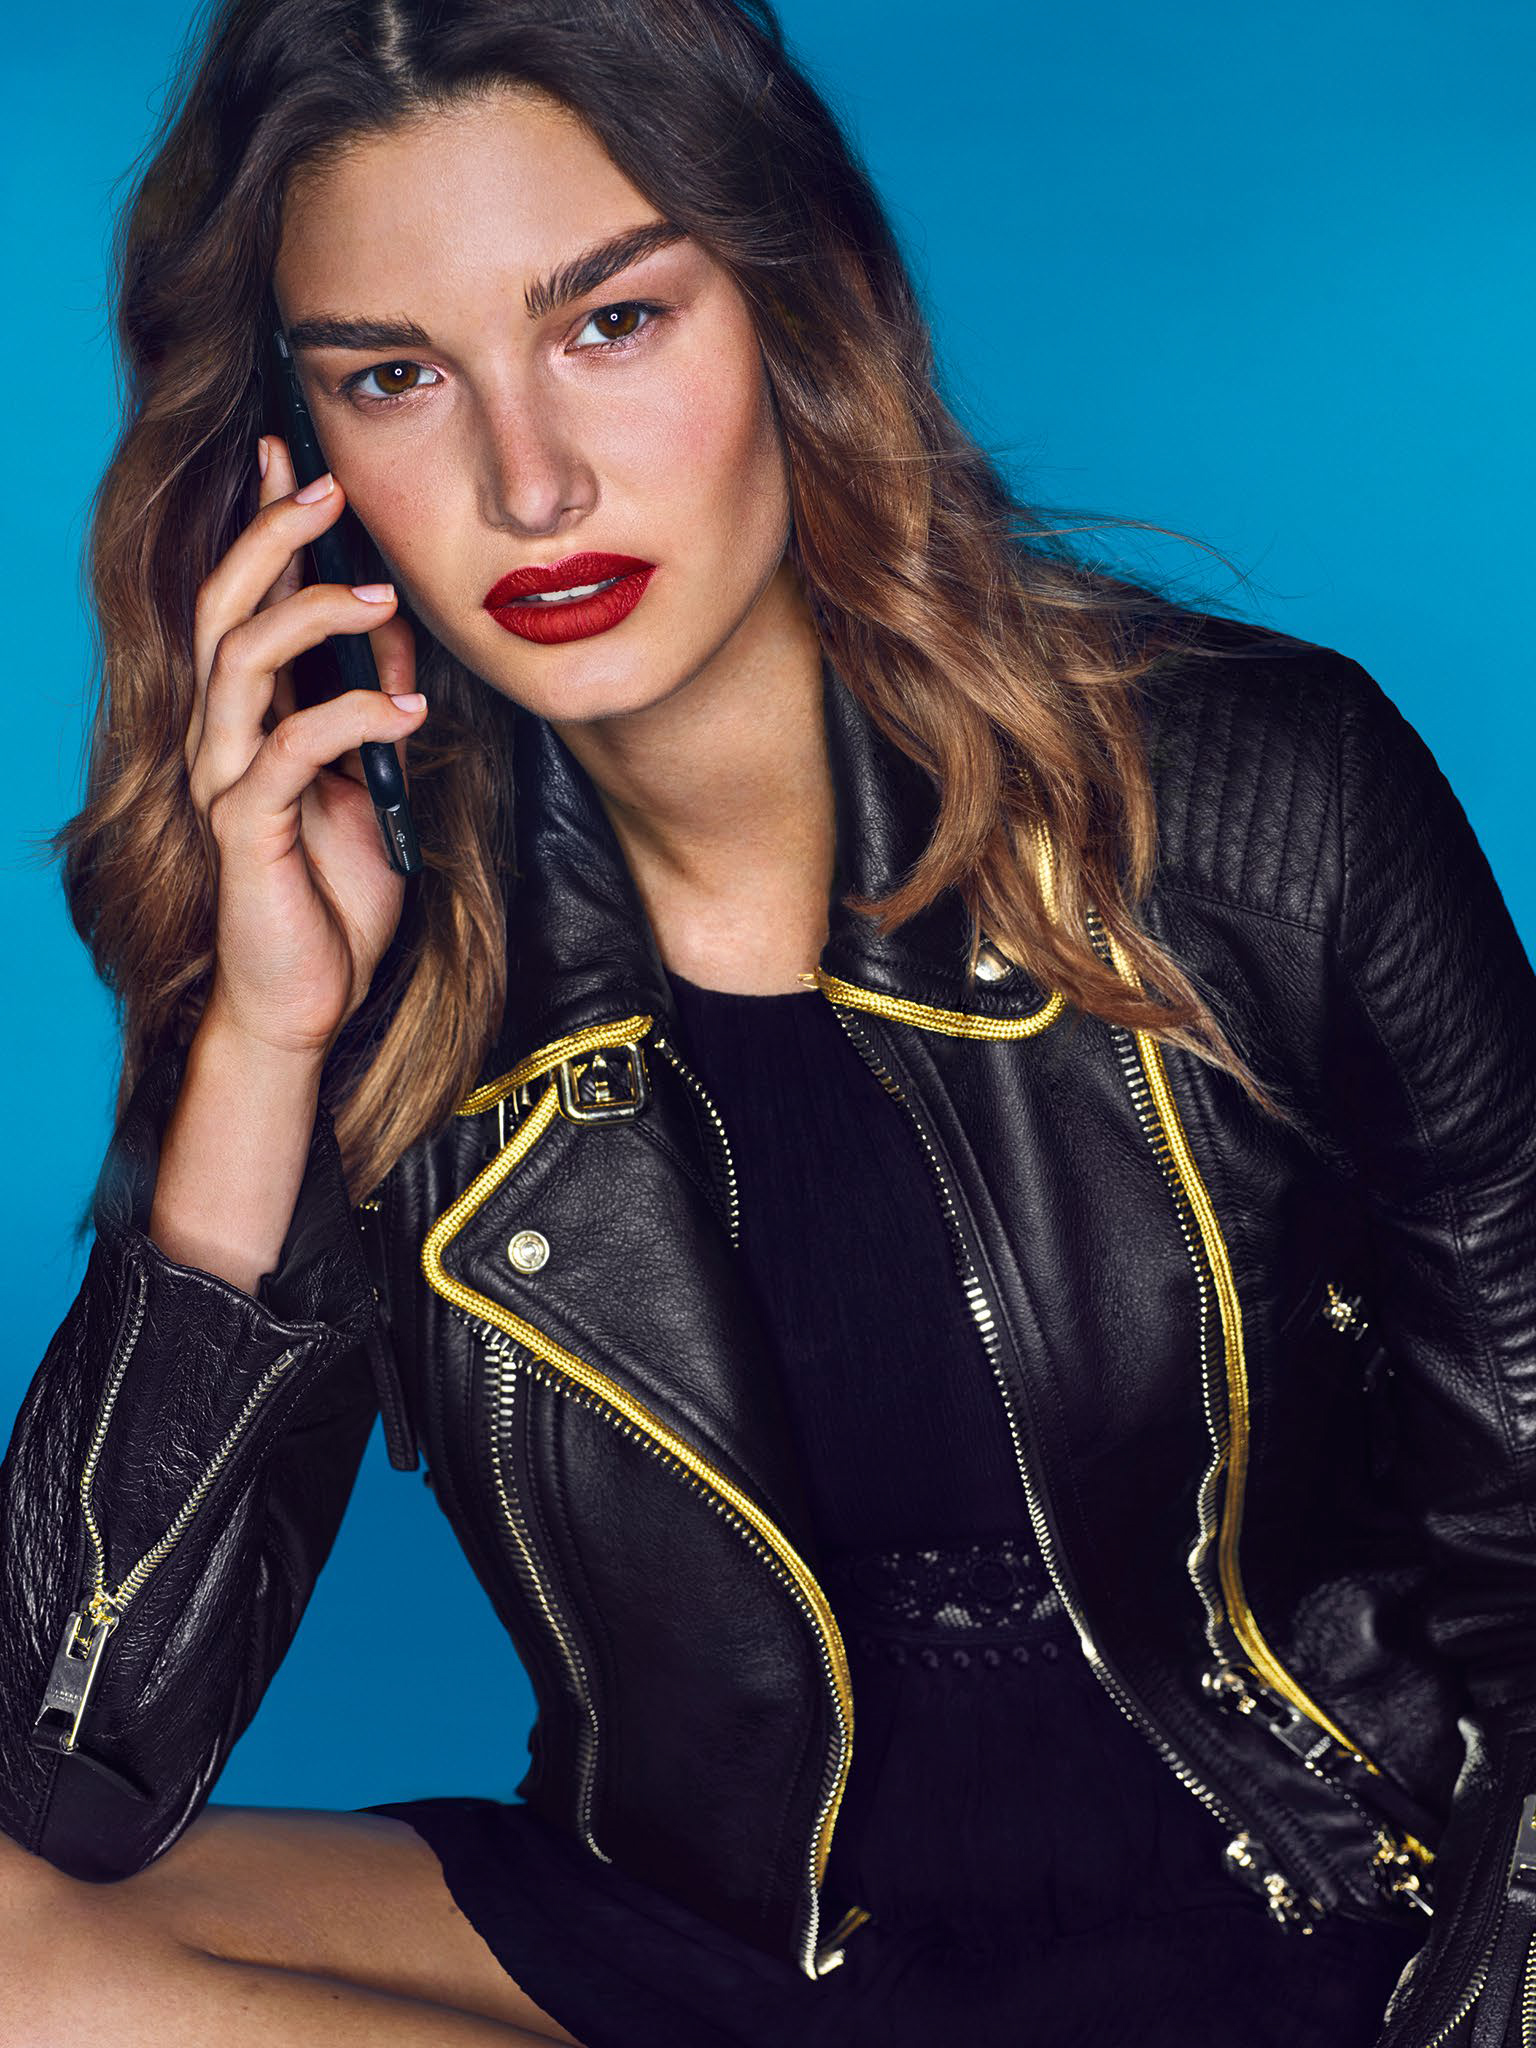 Vogue_Mexico-July_2016-Ophelie_Guillermand-by-Hunter_and_Gatti-09.jpg